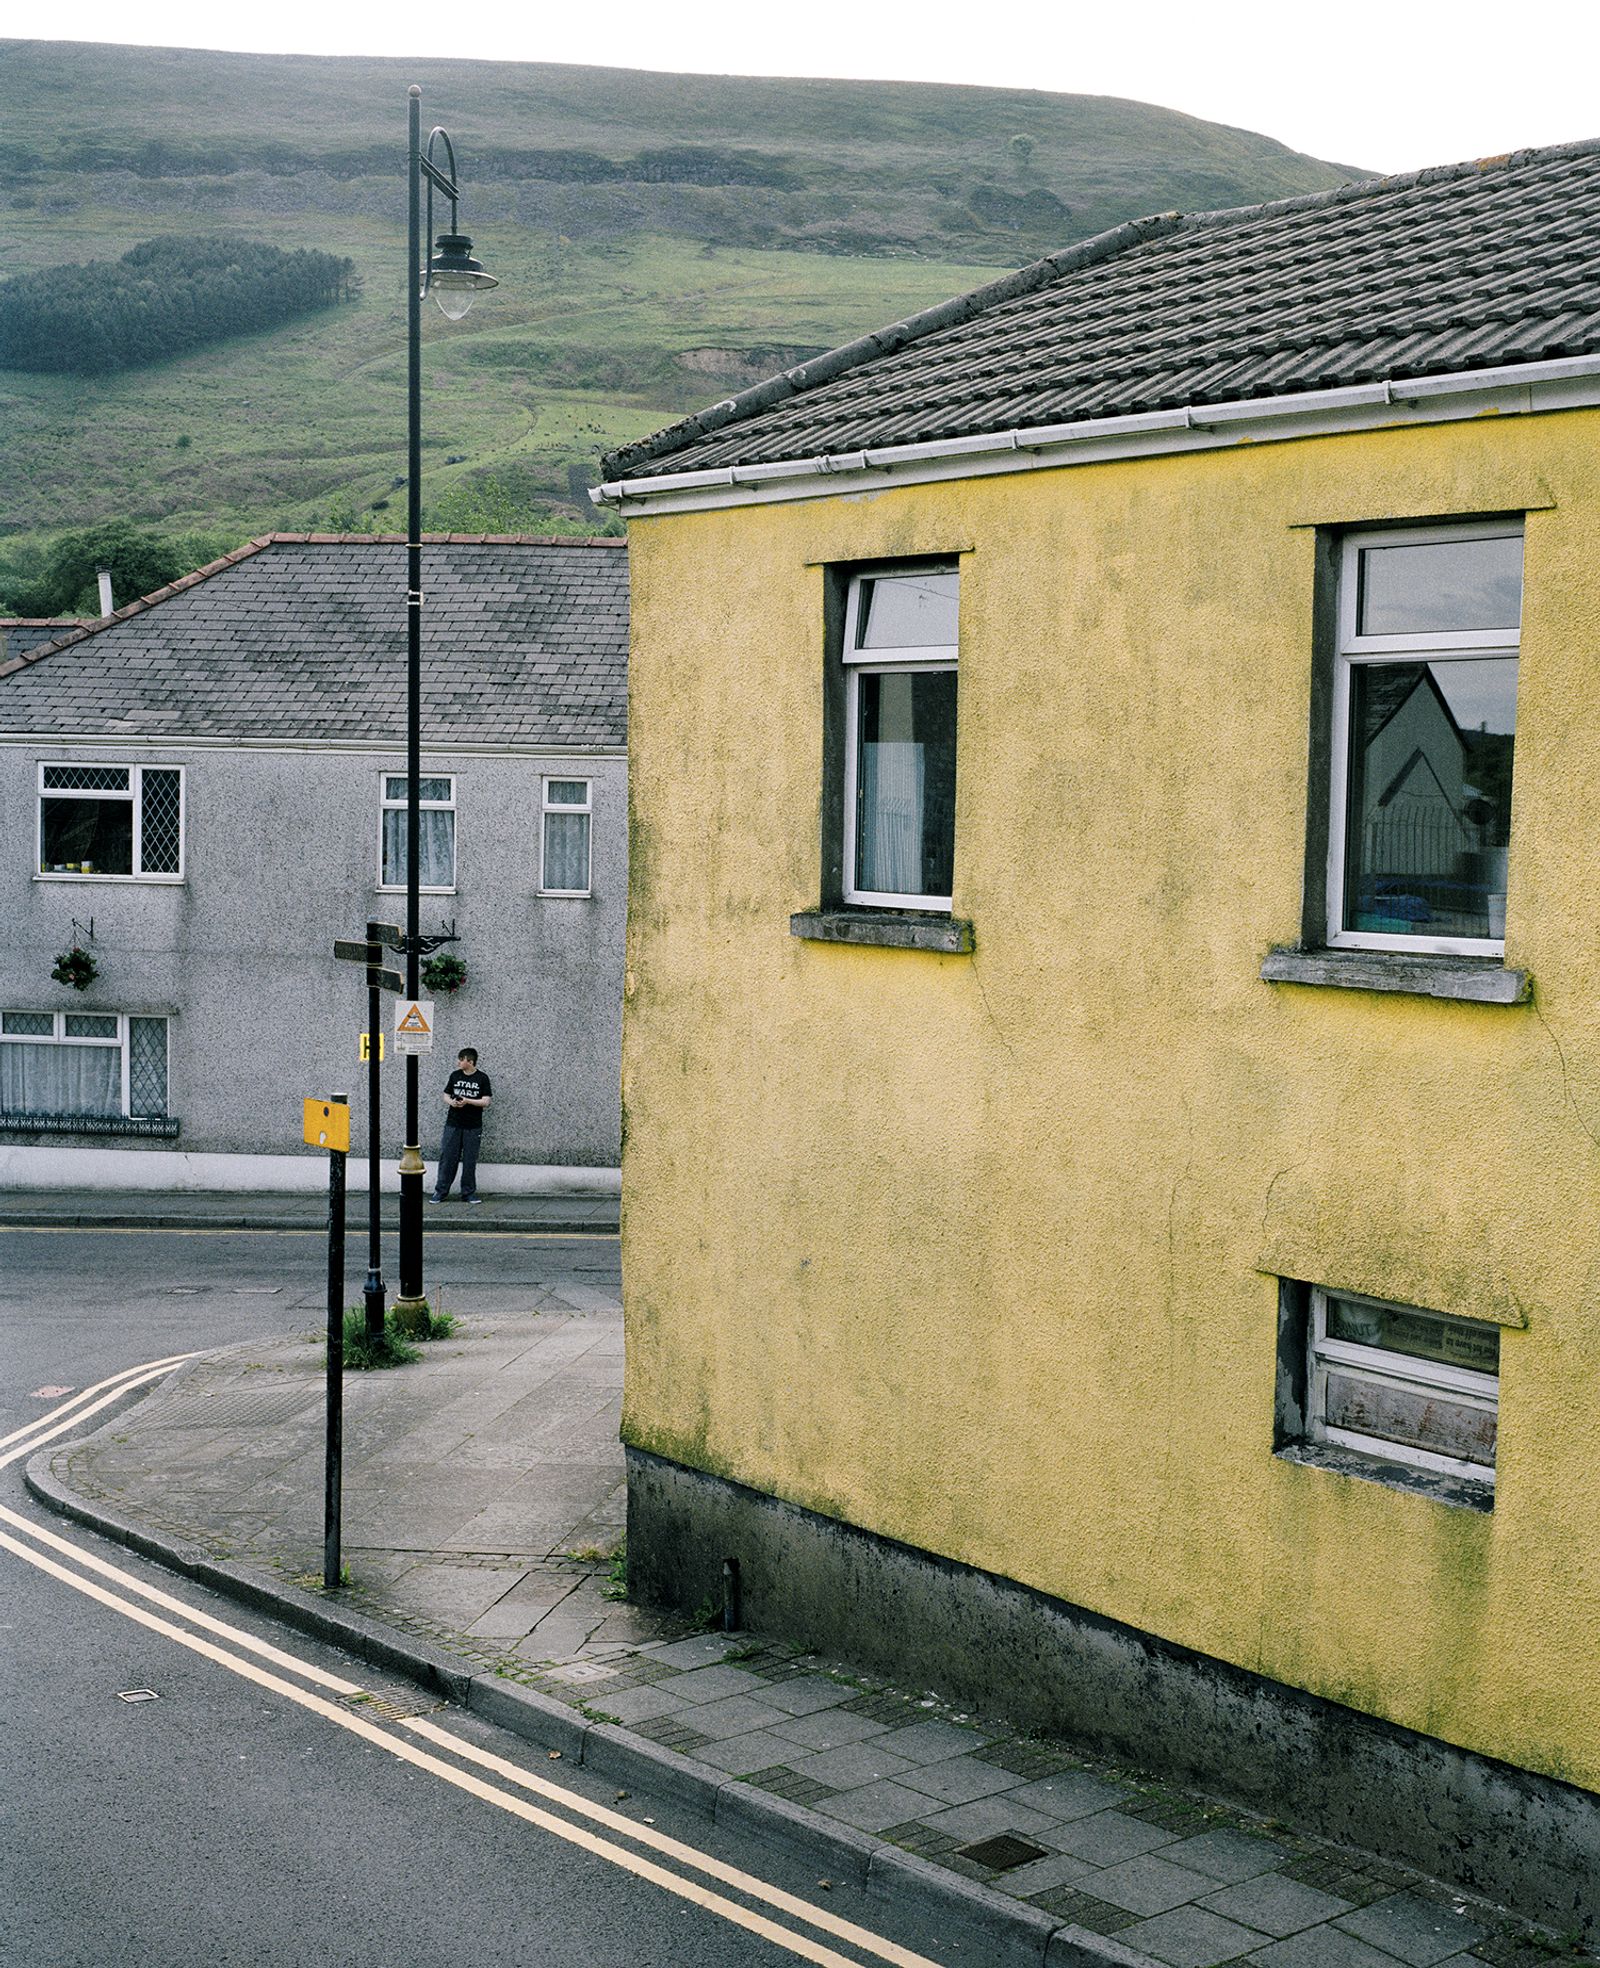 © Sebastián Bruno - Image from the BLAenau gwent photography special photography project